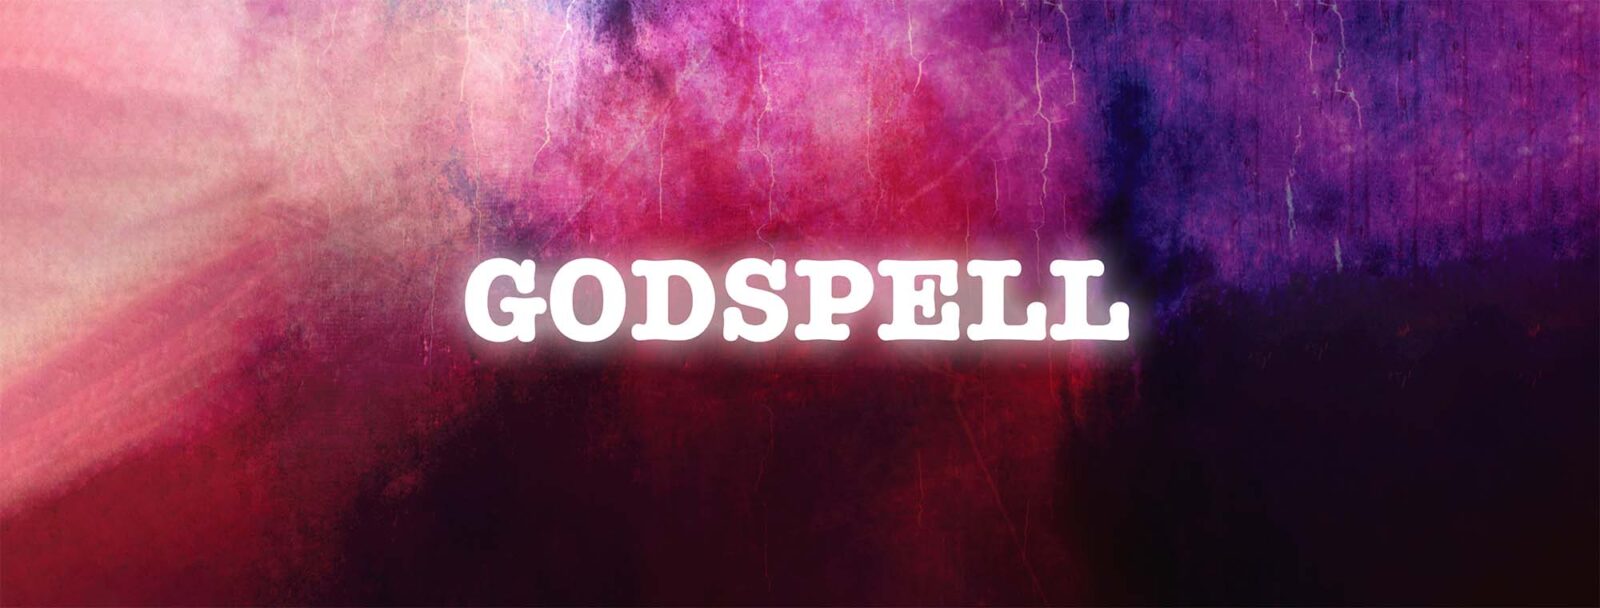 featured image of godspell